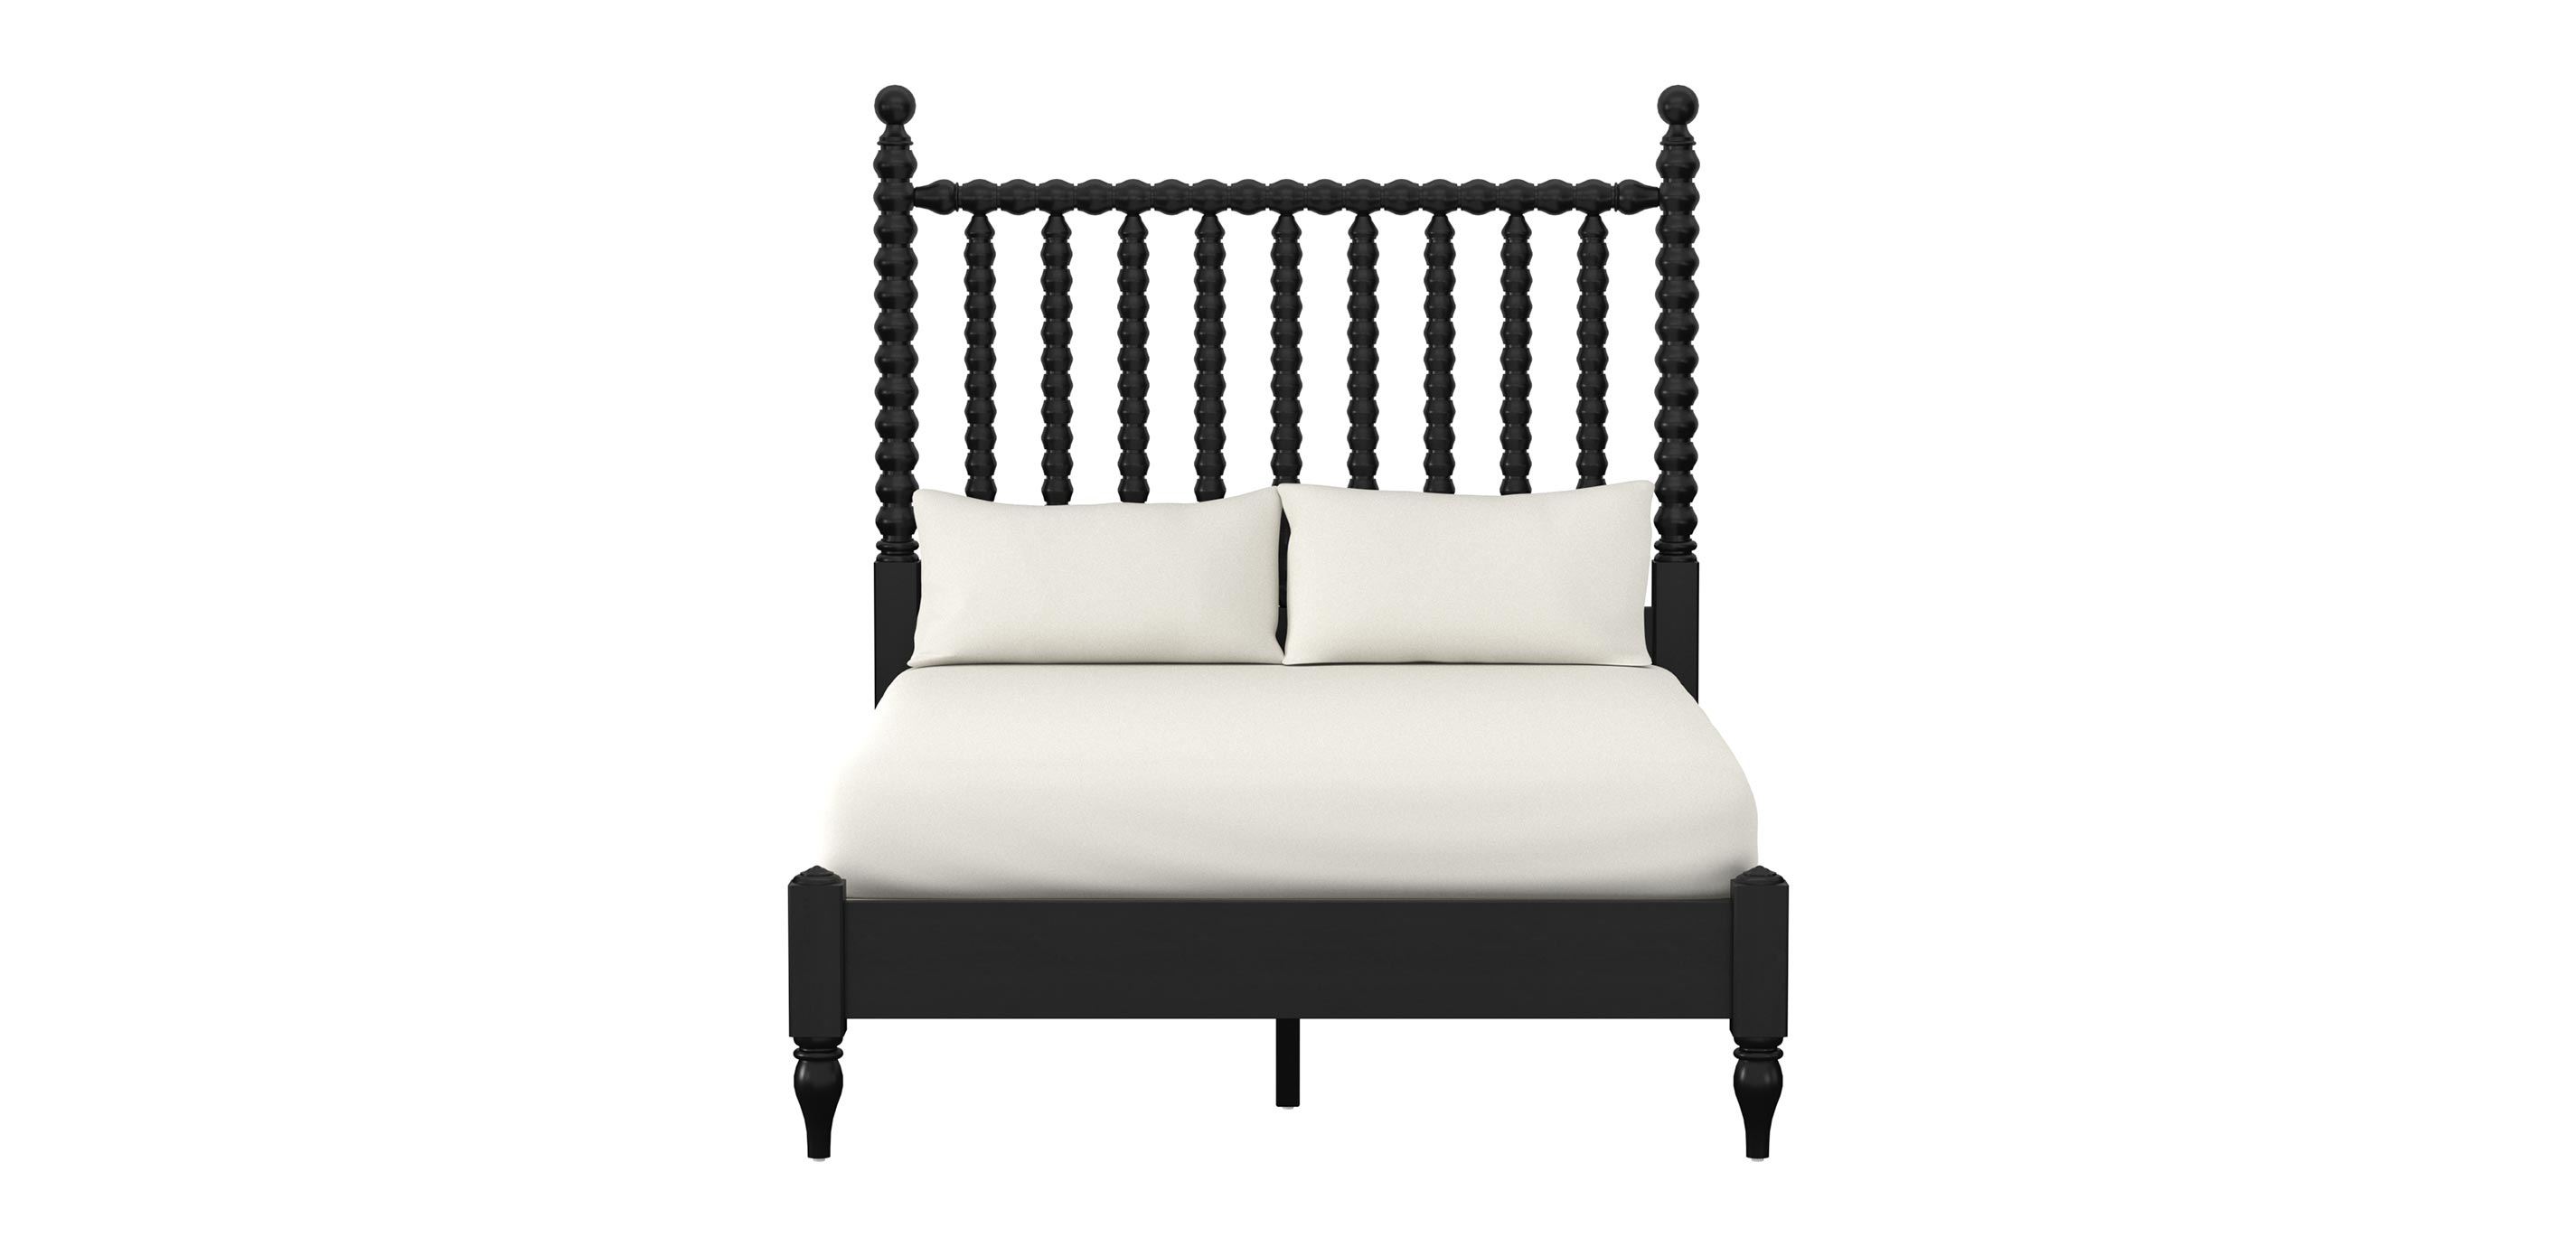 Spindle Bed Jenny Lind Ethan Allen, Twin Spindle Bed